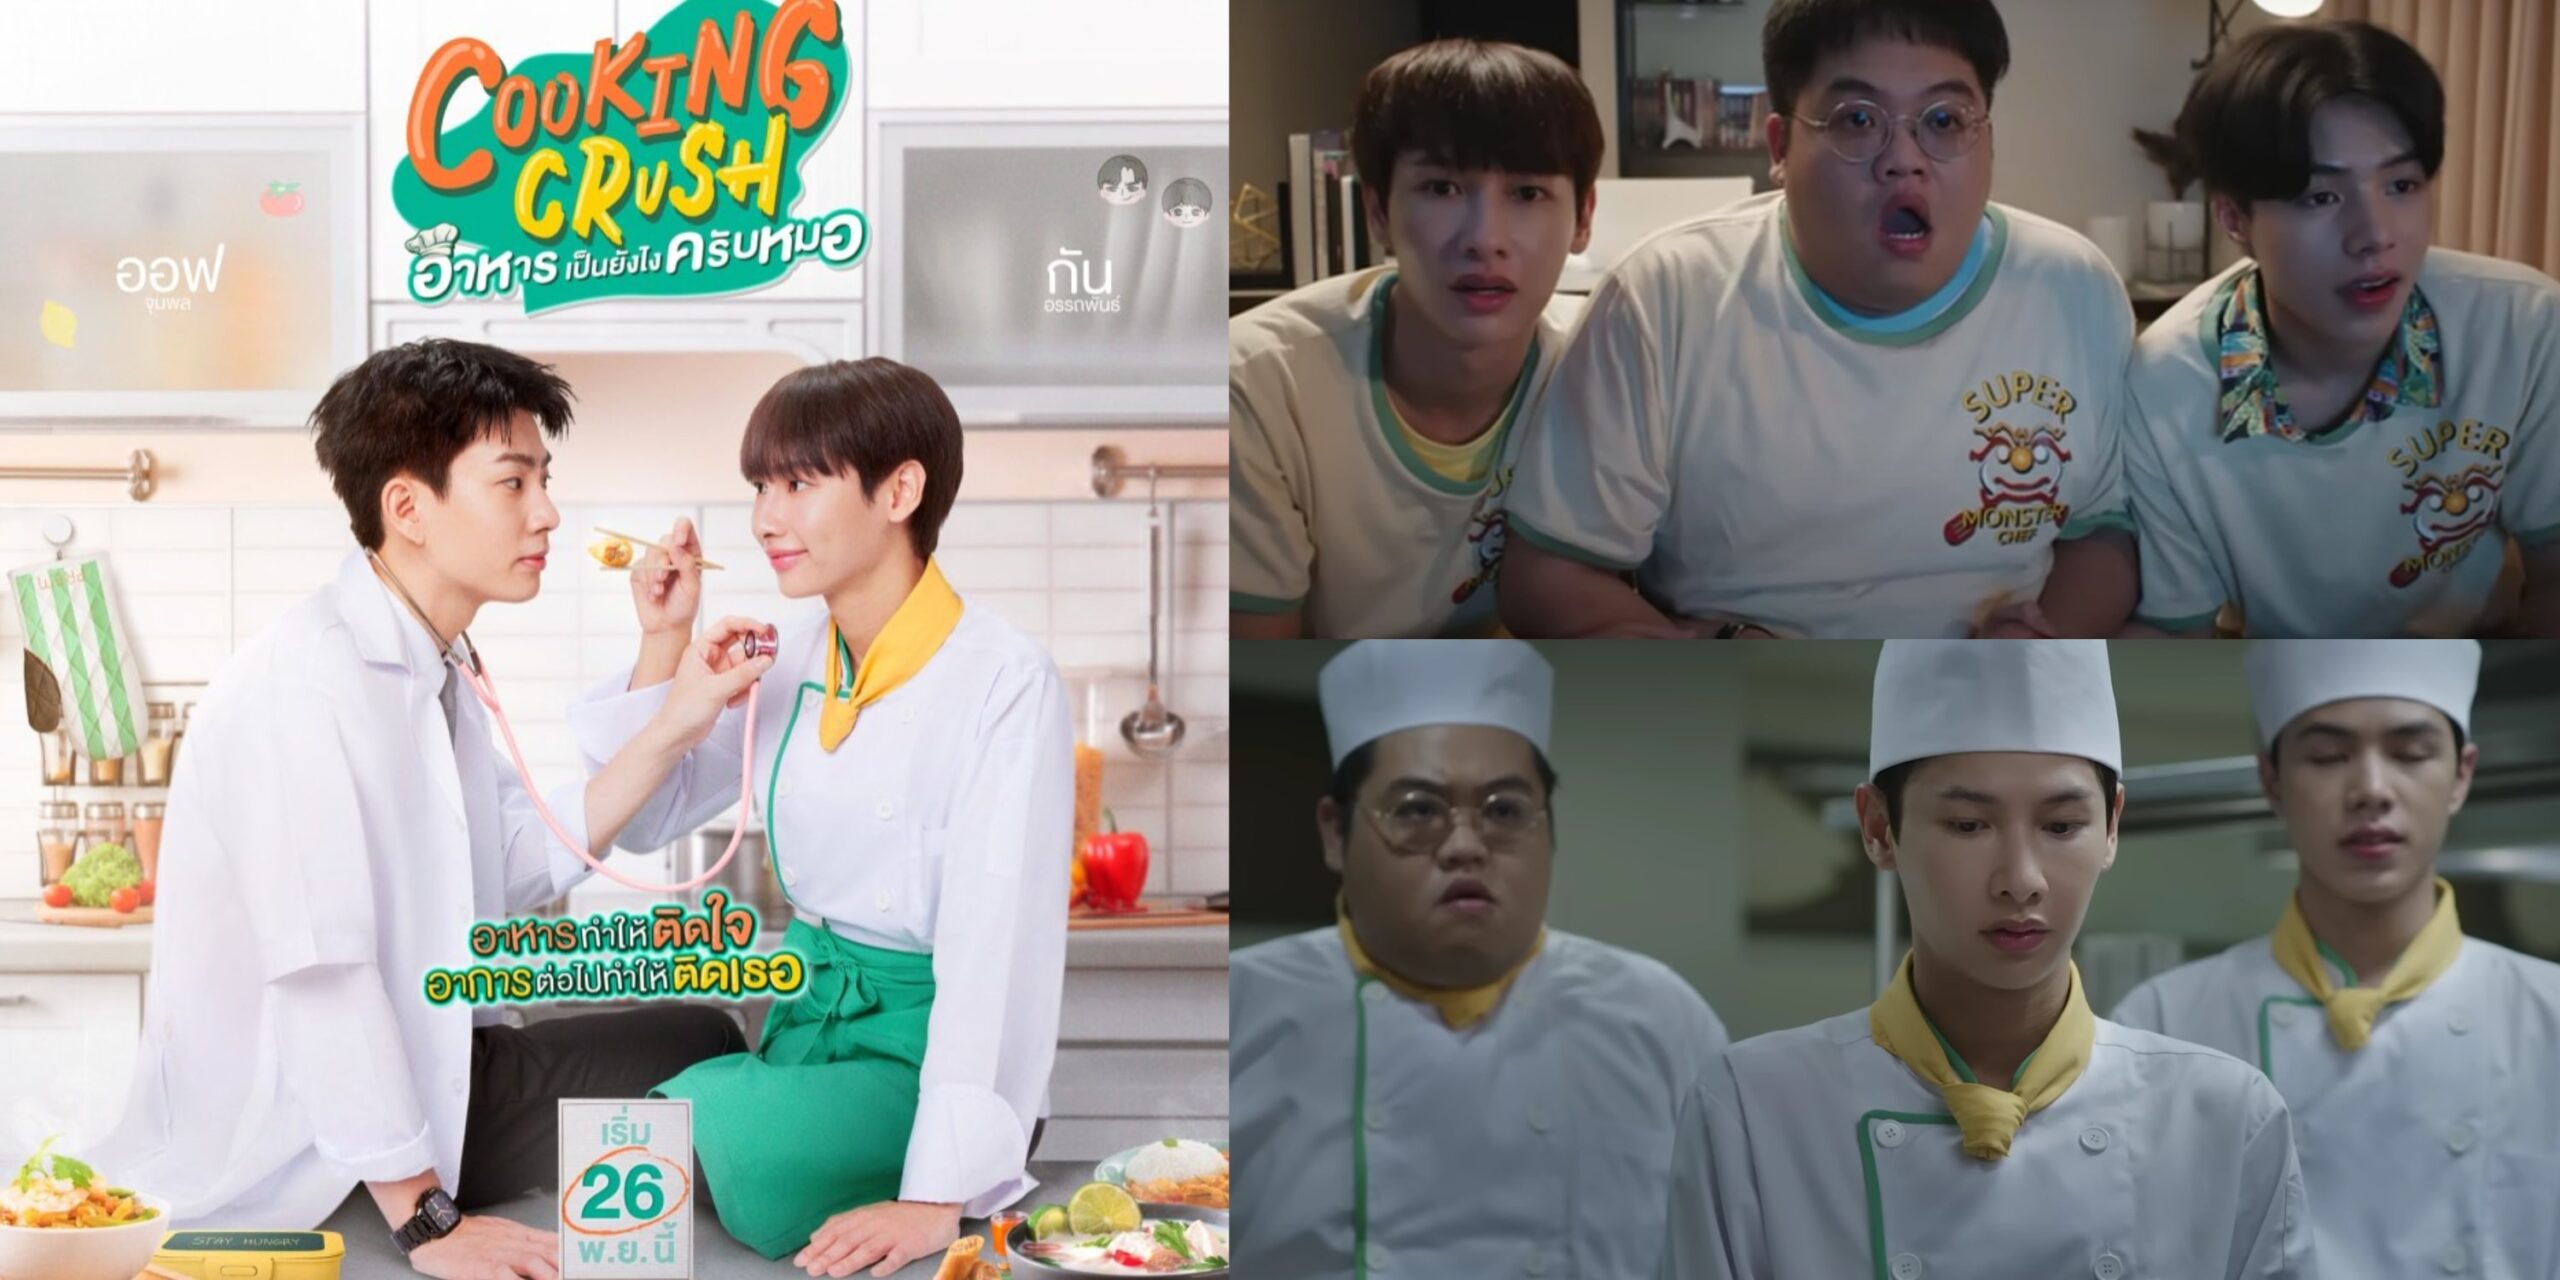 Thai BL Series Cooking Crush Episode 1 Release Date